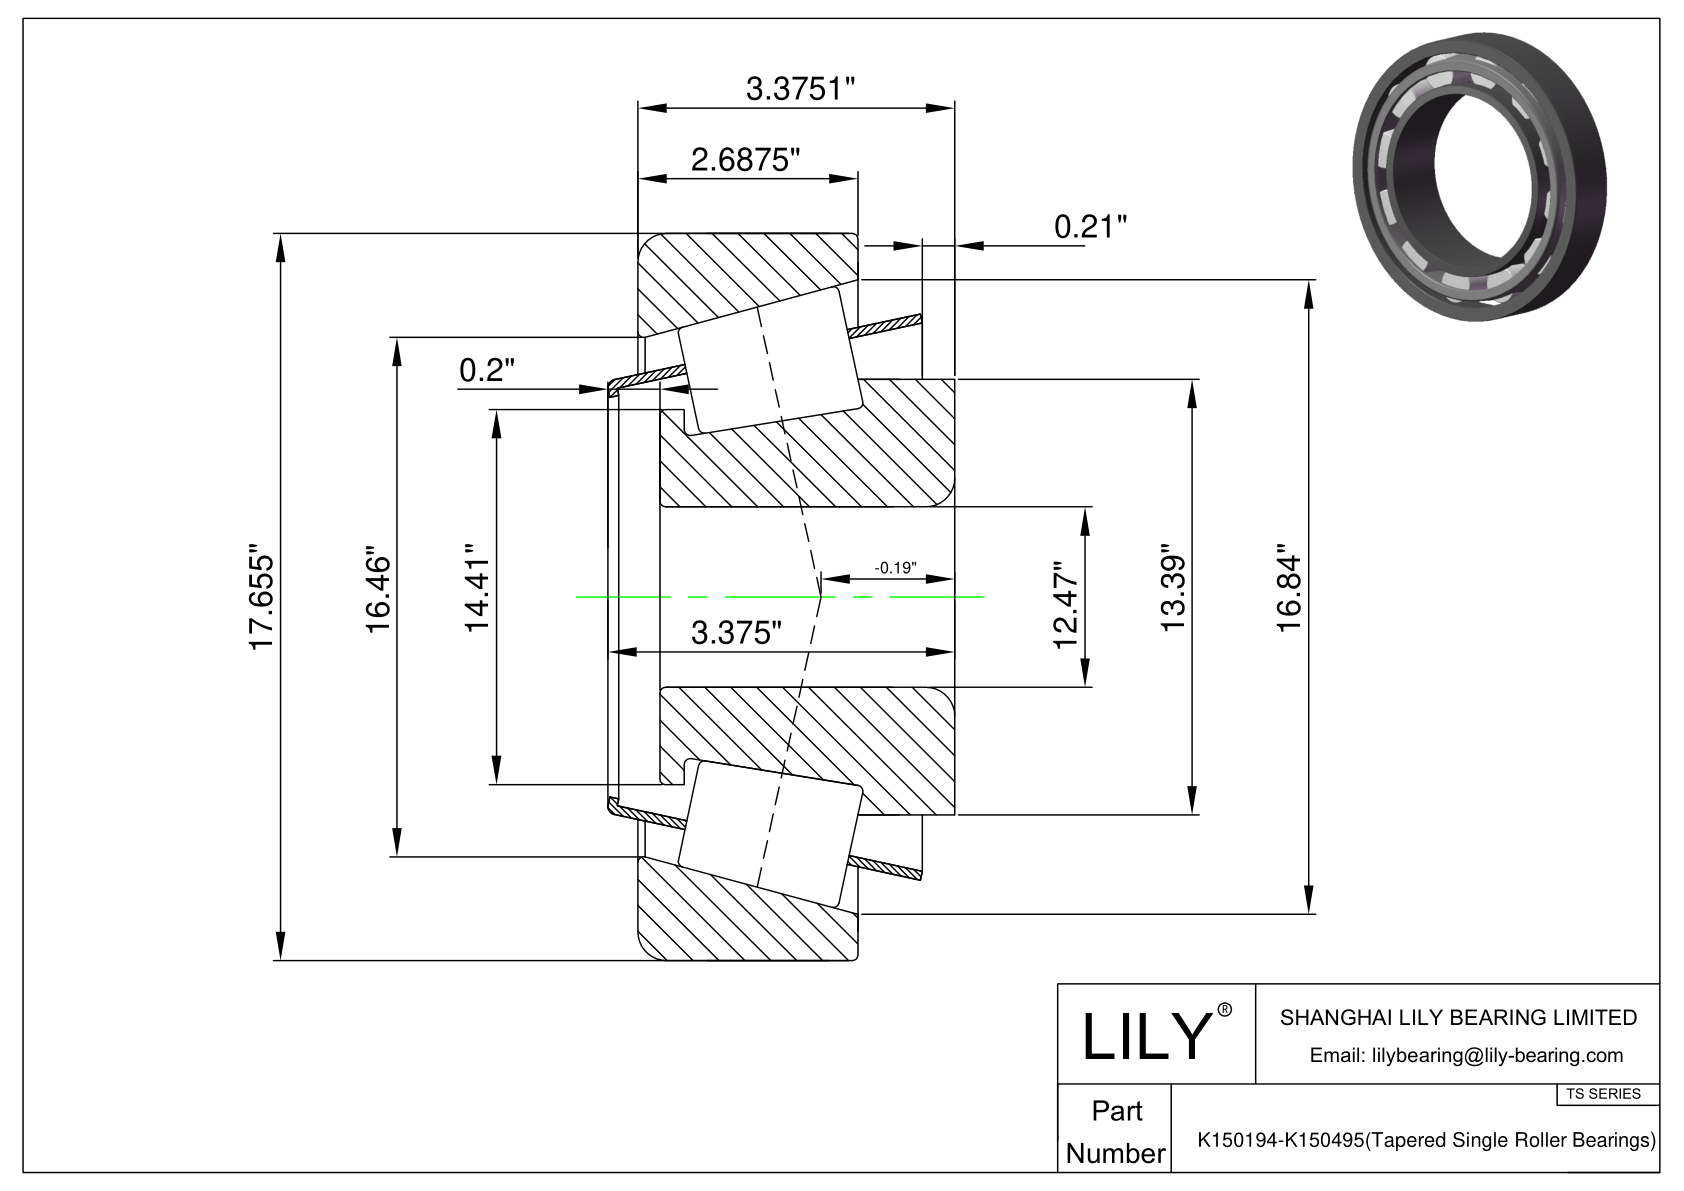 K150194-K150495 TS (Tapered Single Roller Bearings) (Imperial) cad drawing